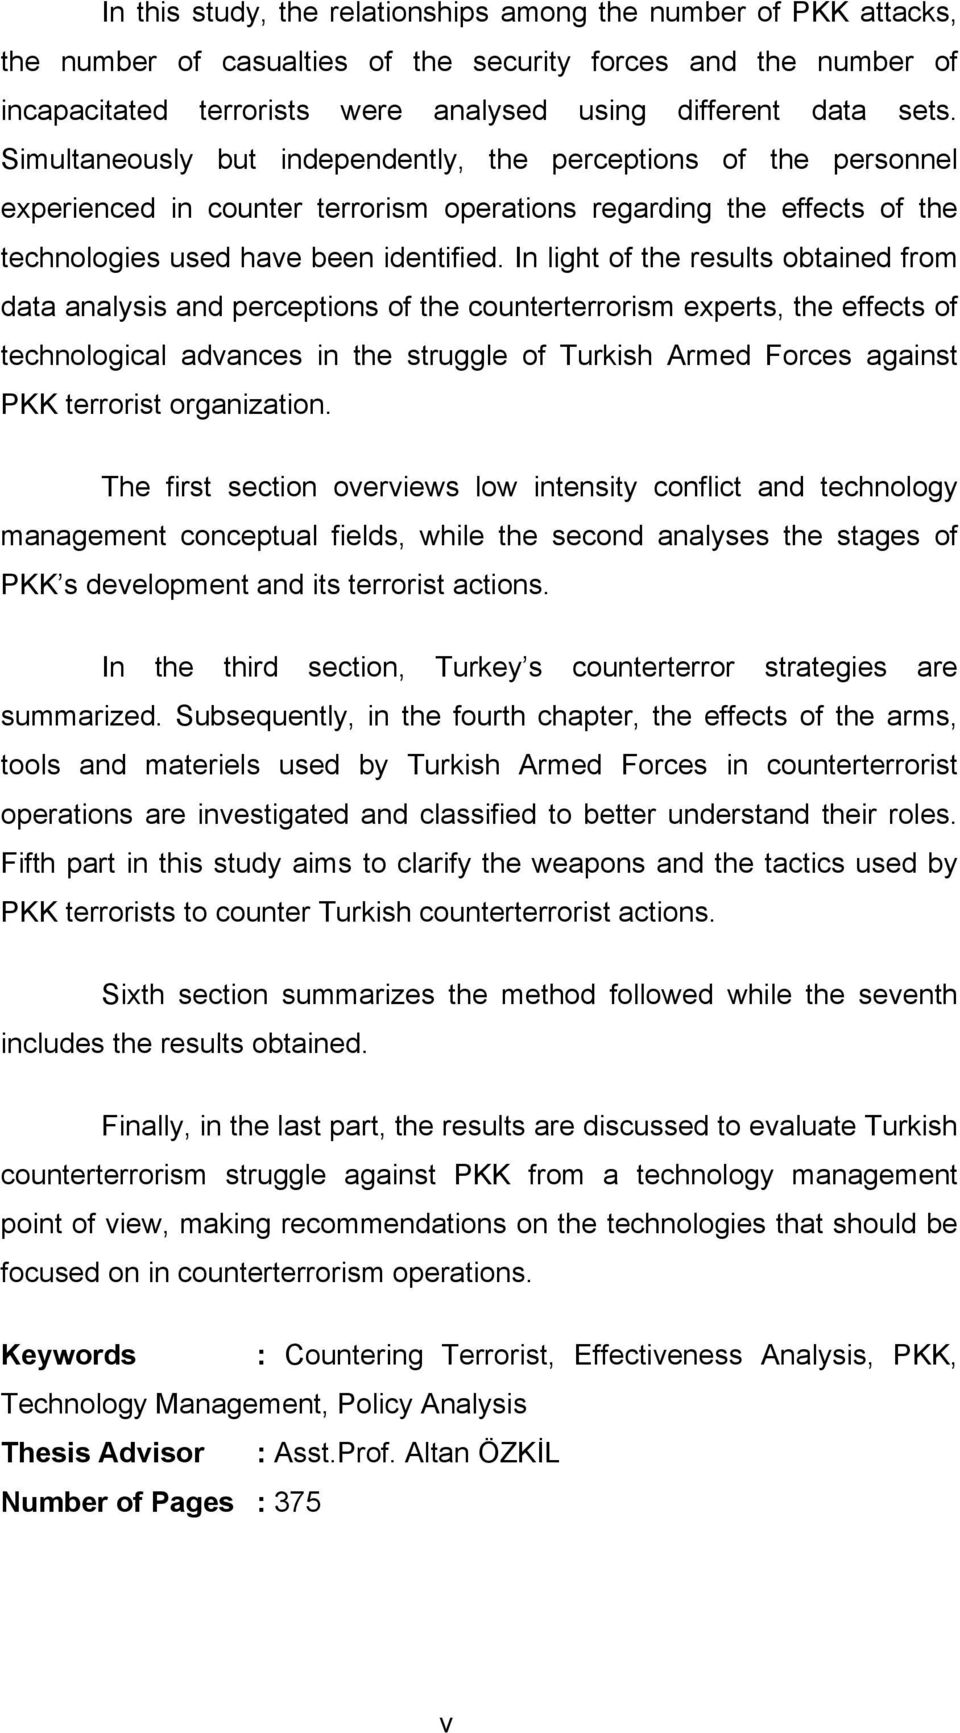 In light of the results obtained from data analysis and perceptions of the counterterrorism experts, the effects of technological advances in the struggle of Turkish Armed Forces against PKK